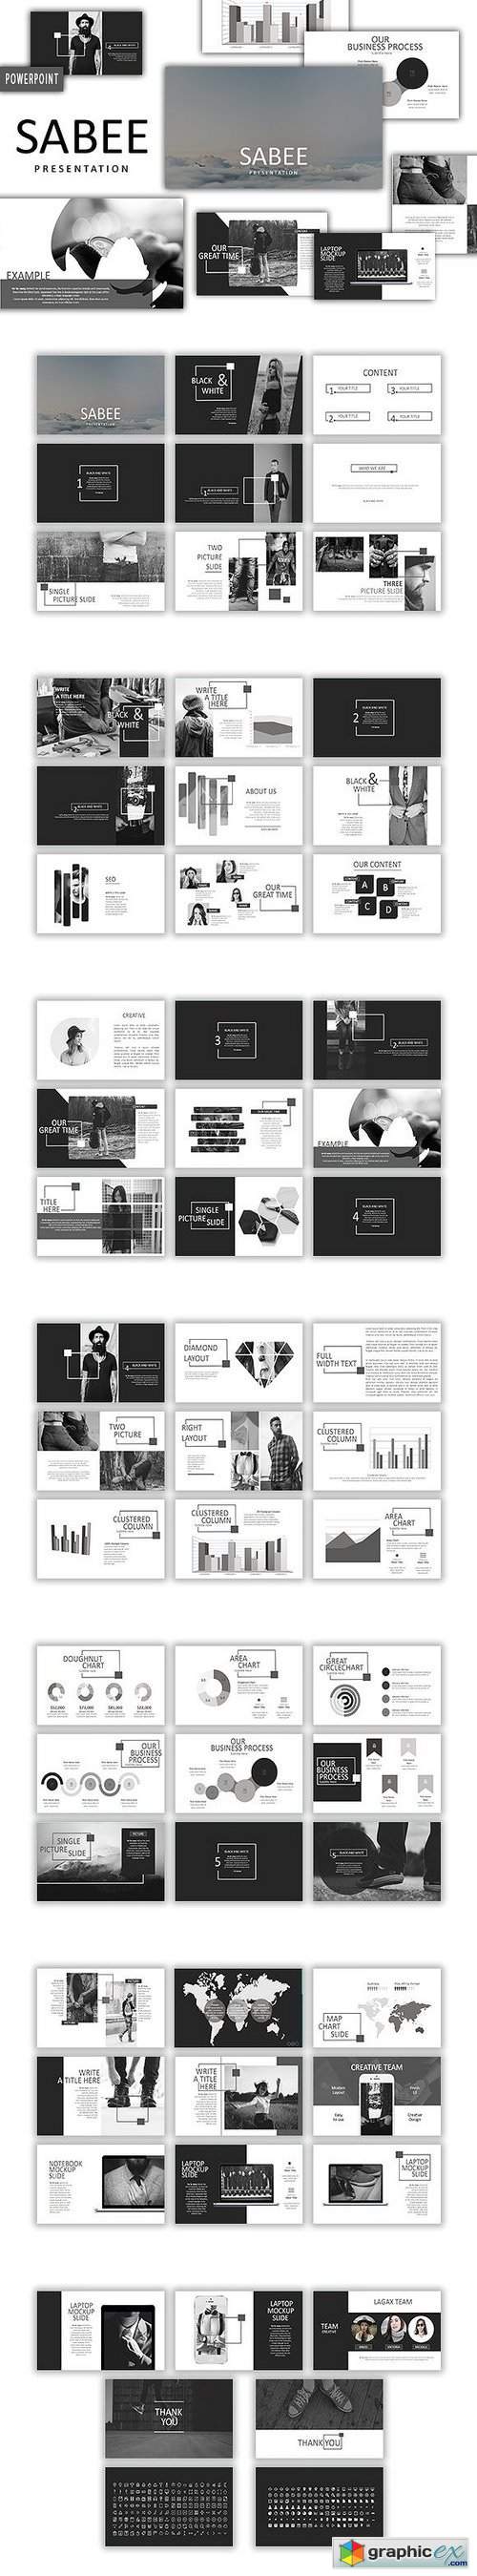 Sabee Powerpoint Template